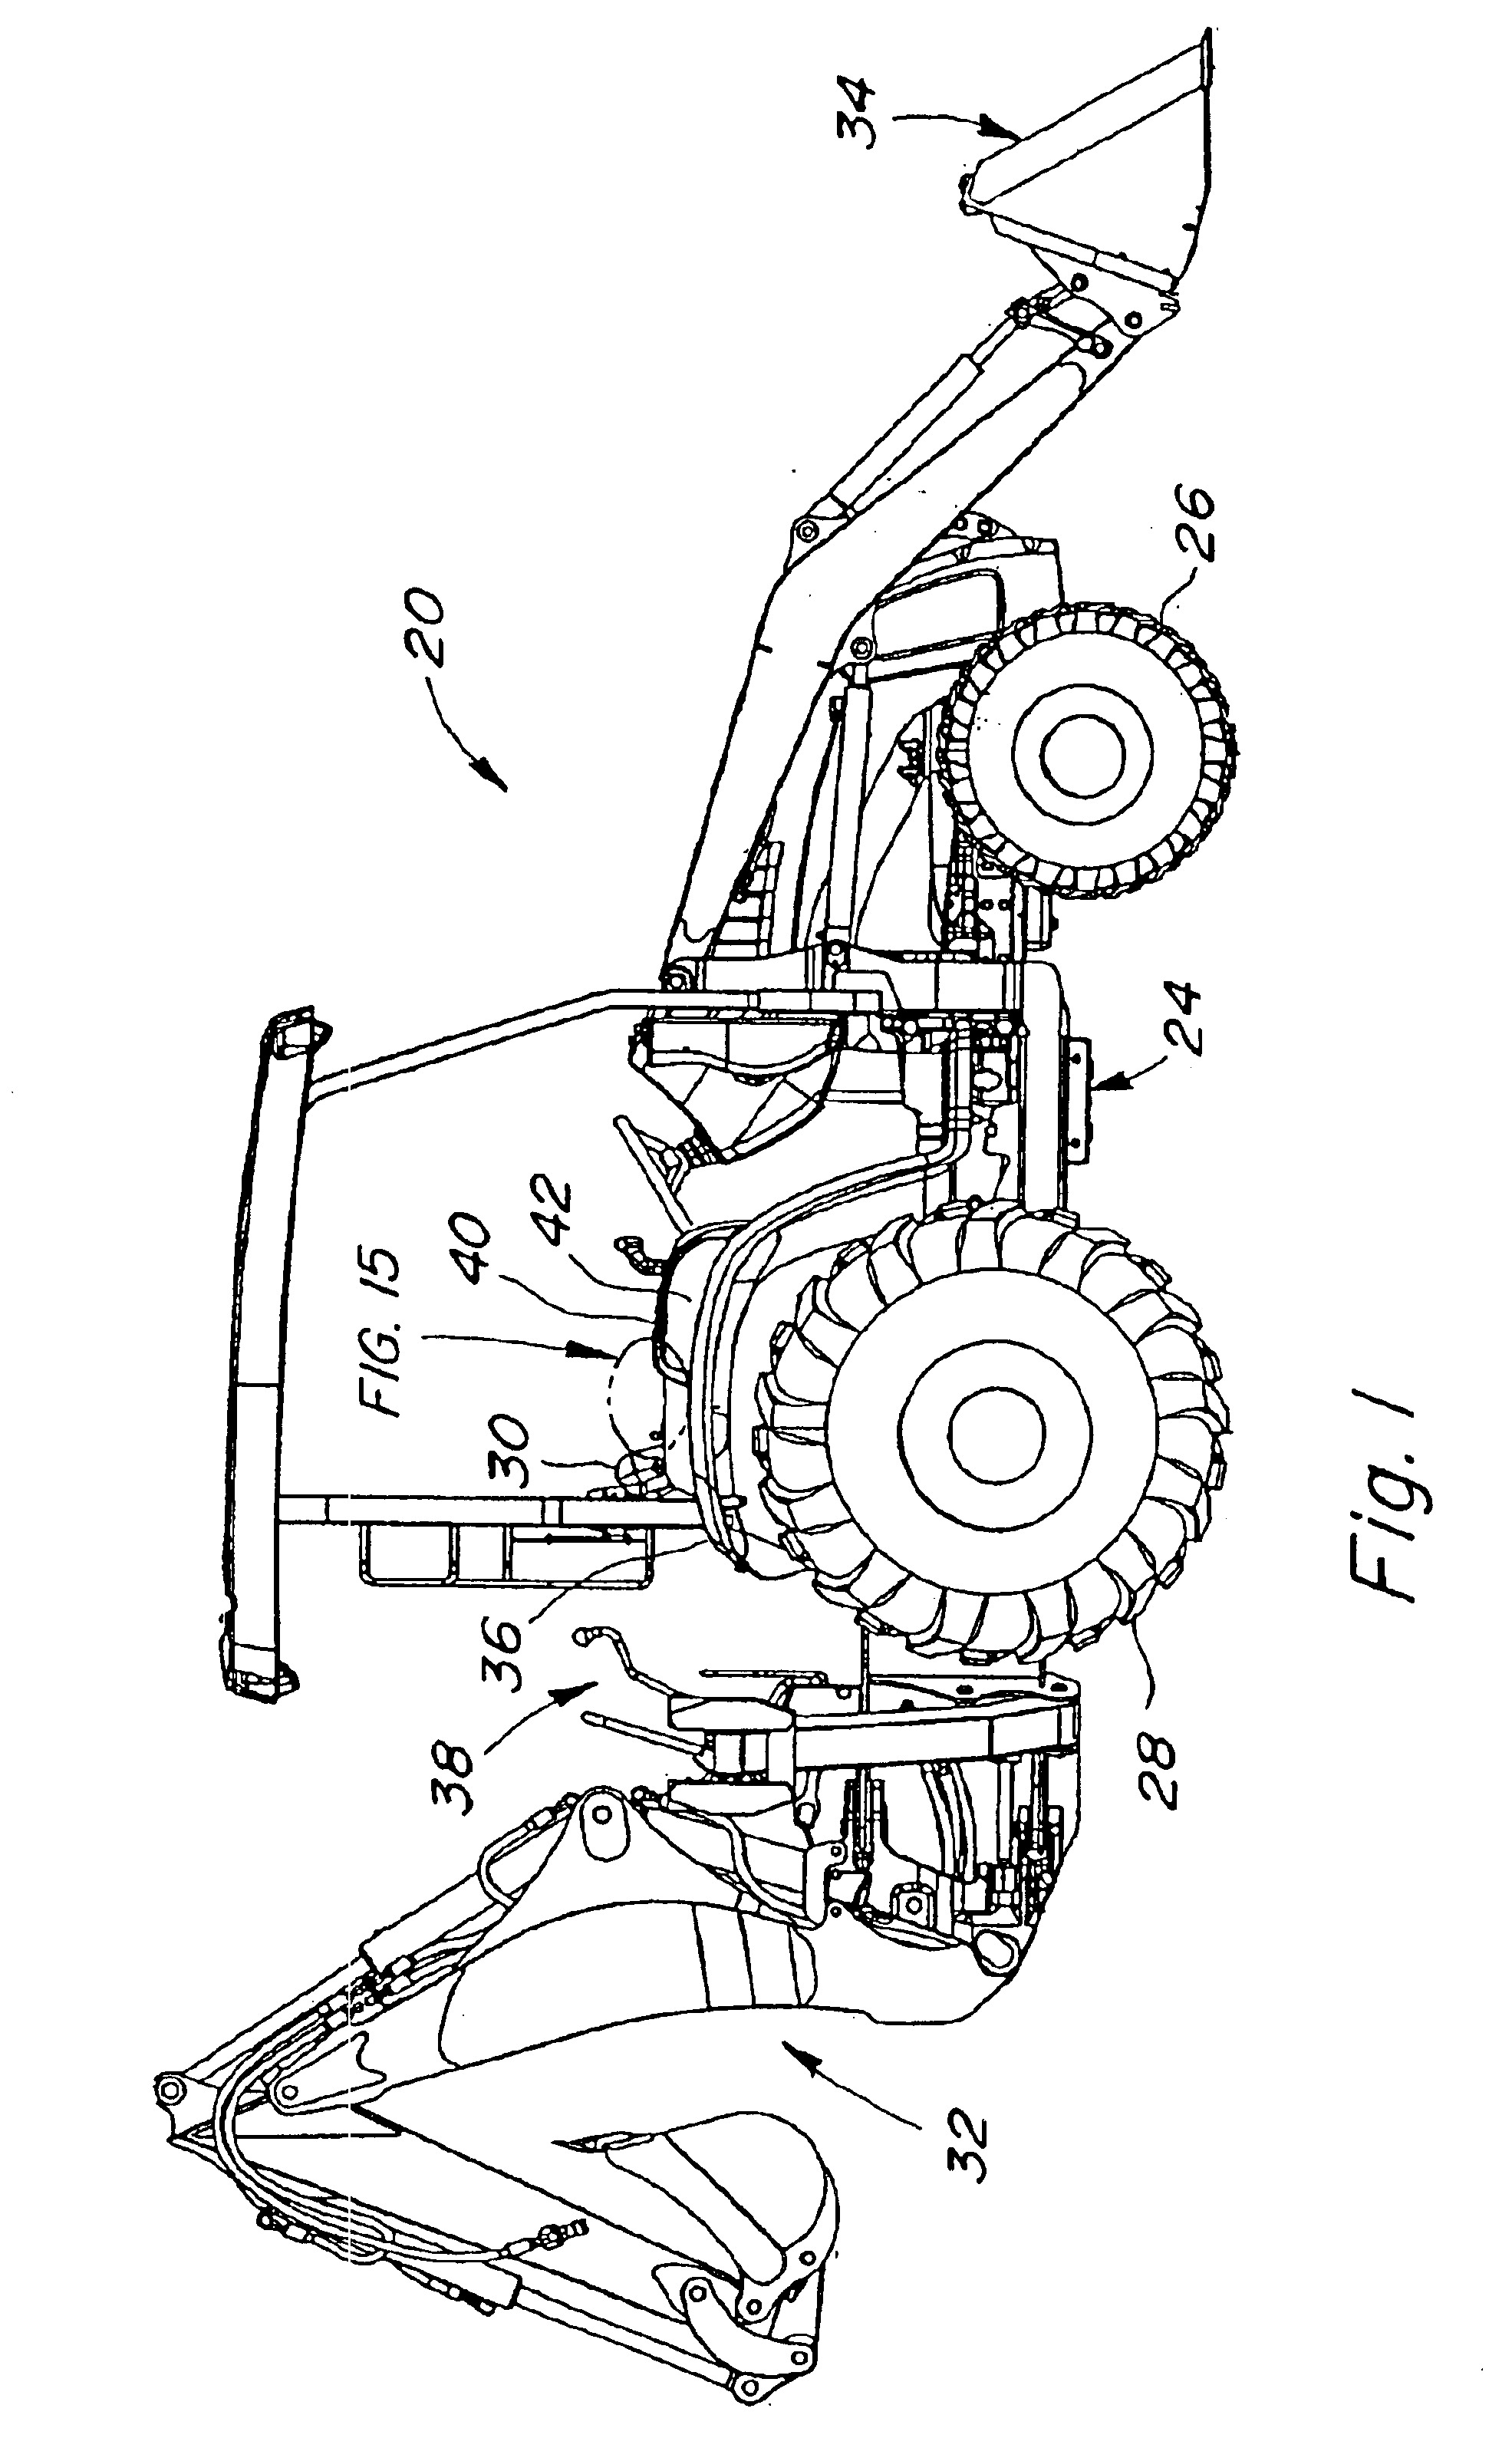 Speed control for utility vehicle operable from rearward-facing seat